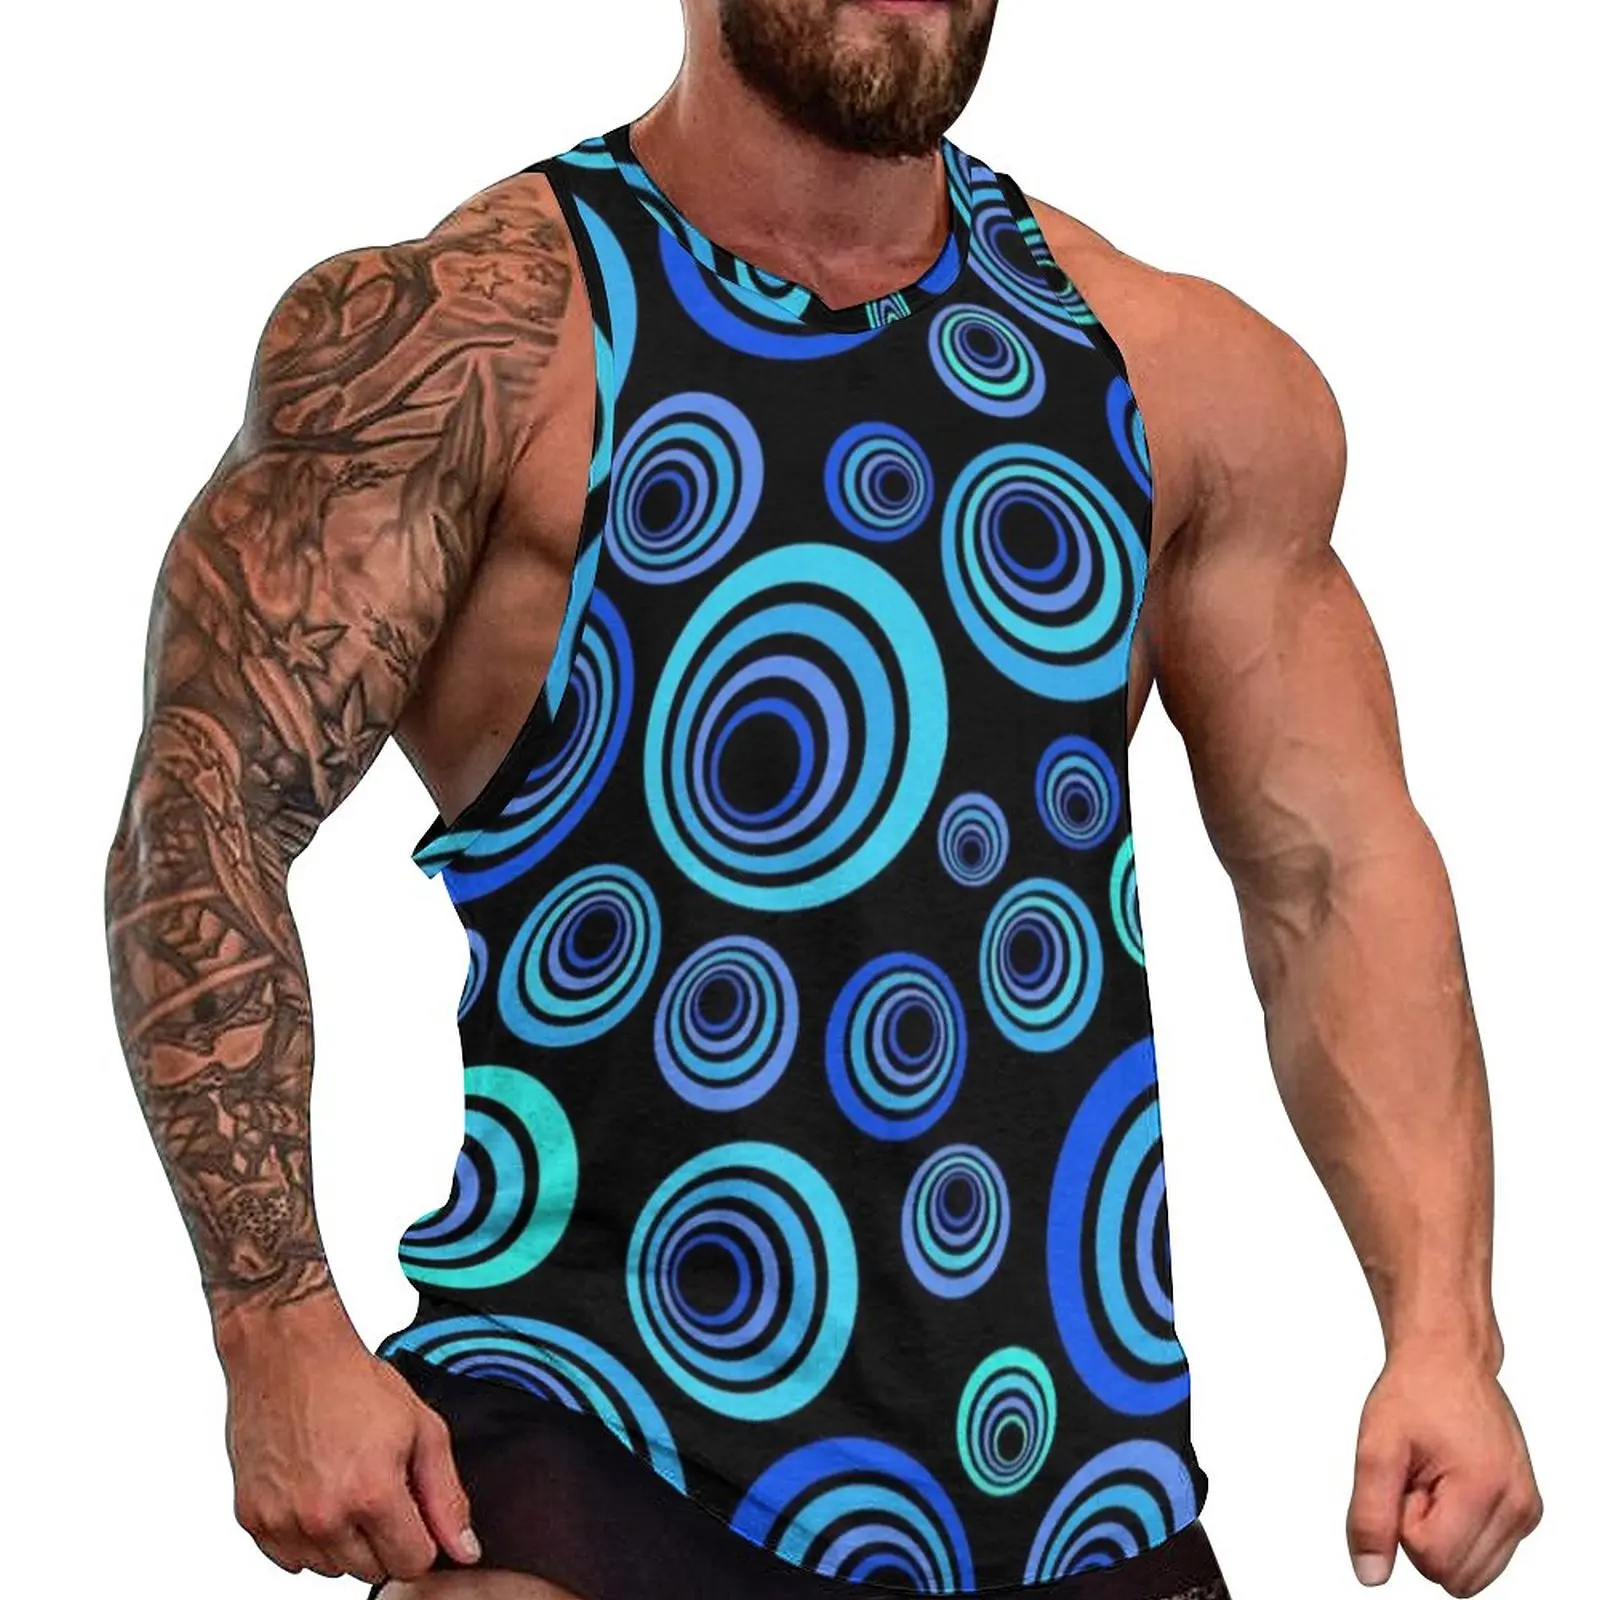 

Pretty Blue Circles Tank Top Man's Retro Pop Art Muscle Tops Daily Training Graphic Sleeveless Vests Large Size 4XL 5XL